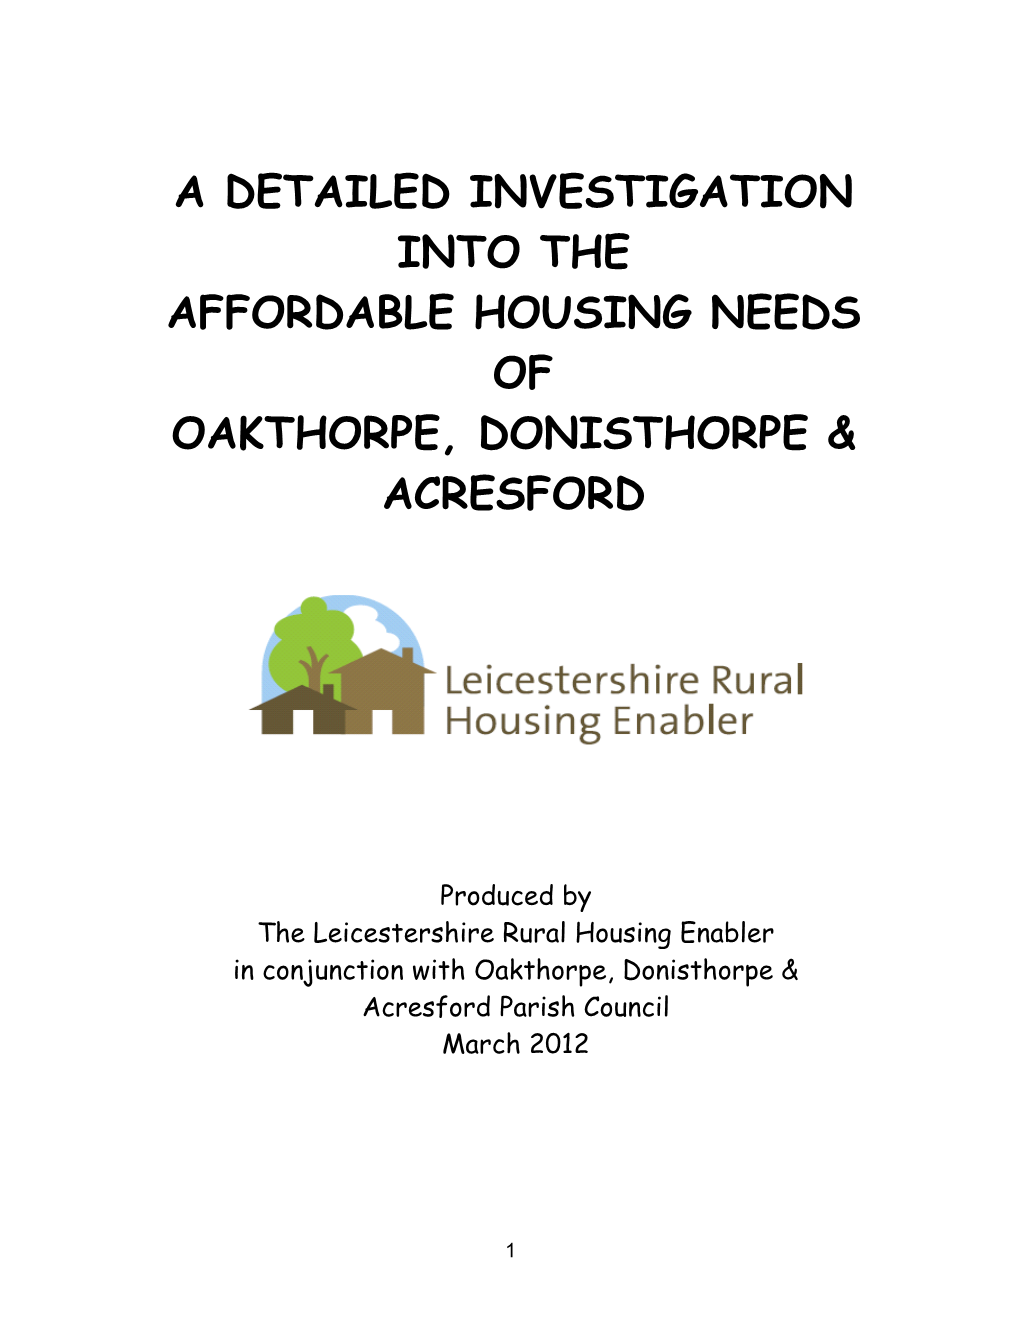 A Detailed Investigation Into the Affordable Housing Needs of Oakthorpe, Donisthorpe & Acresford